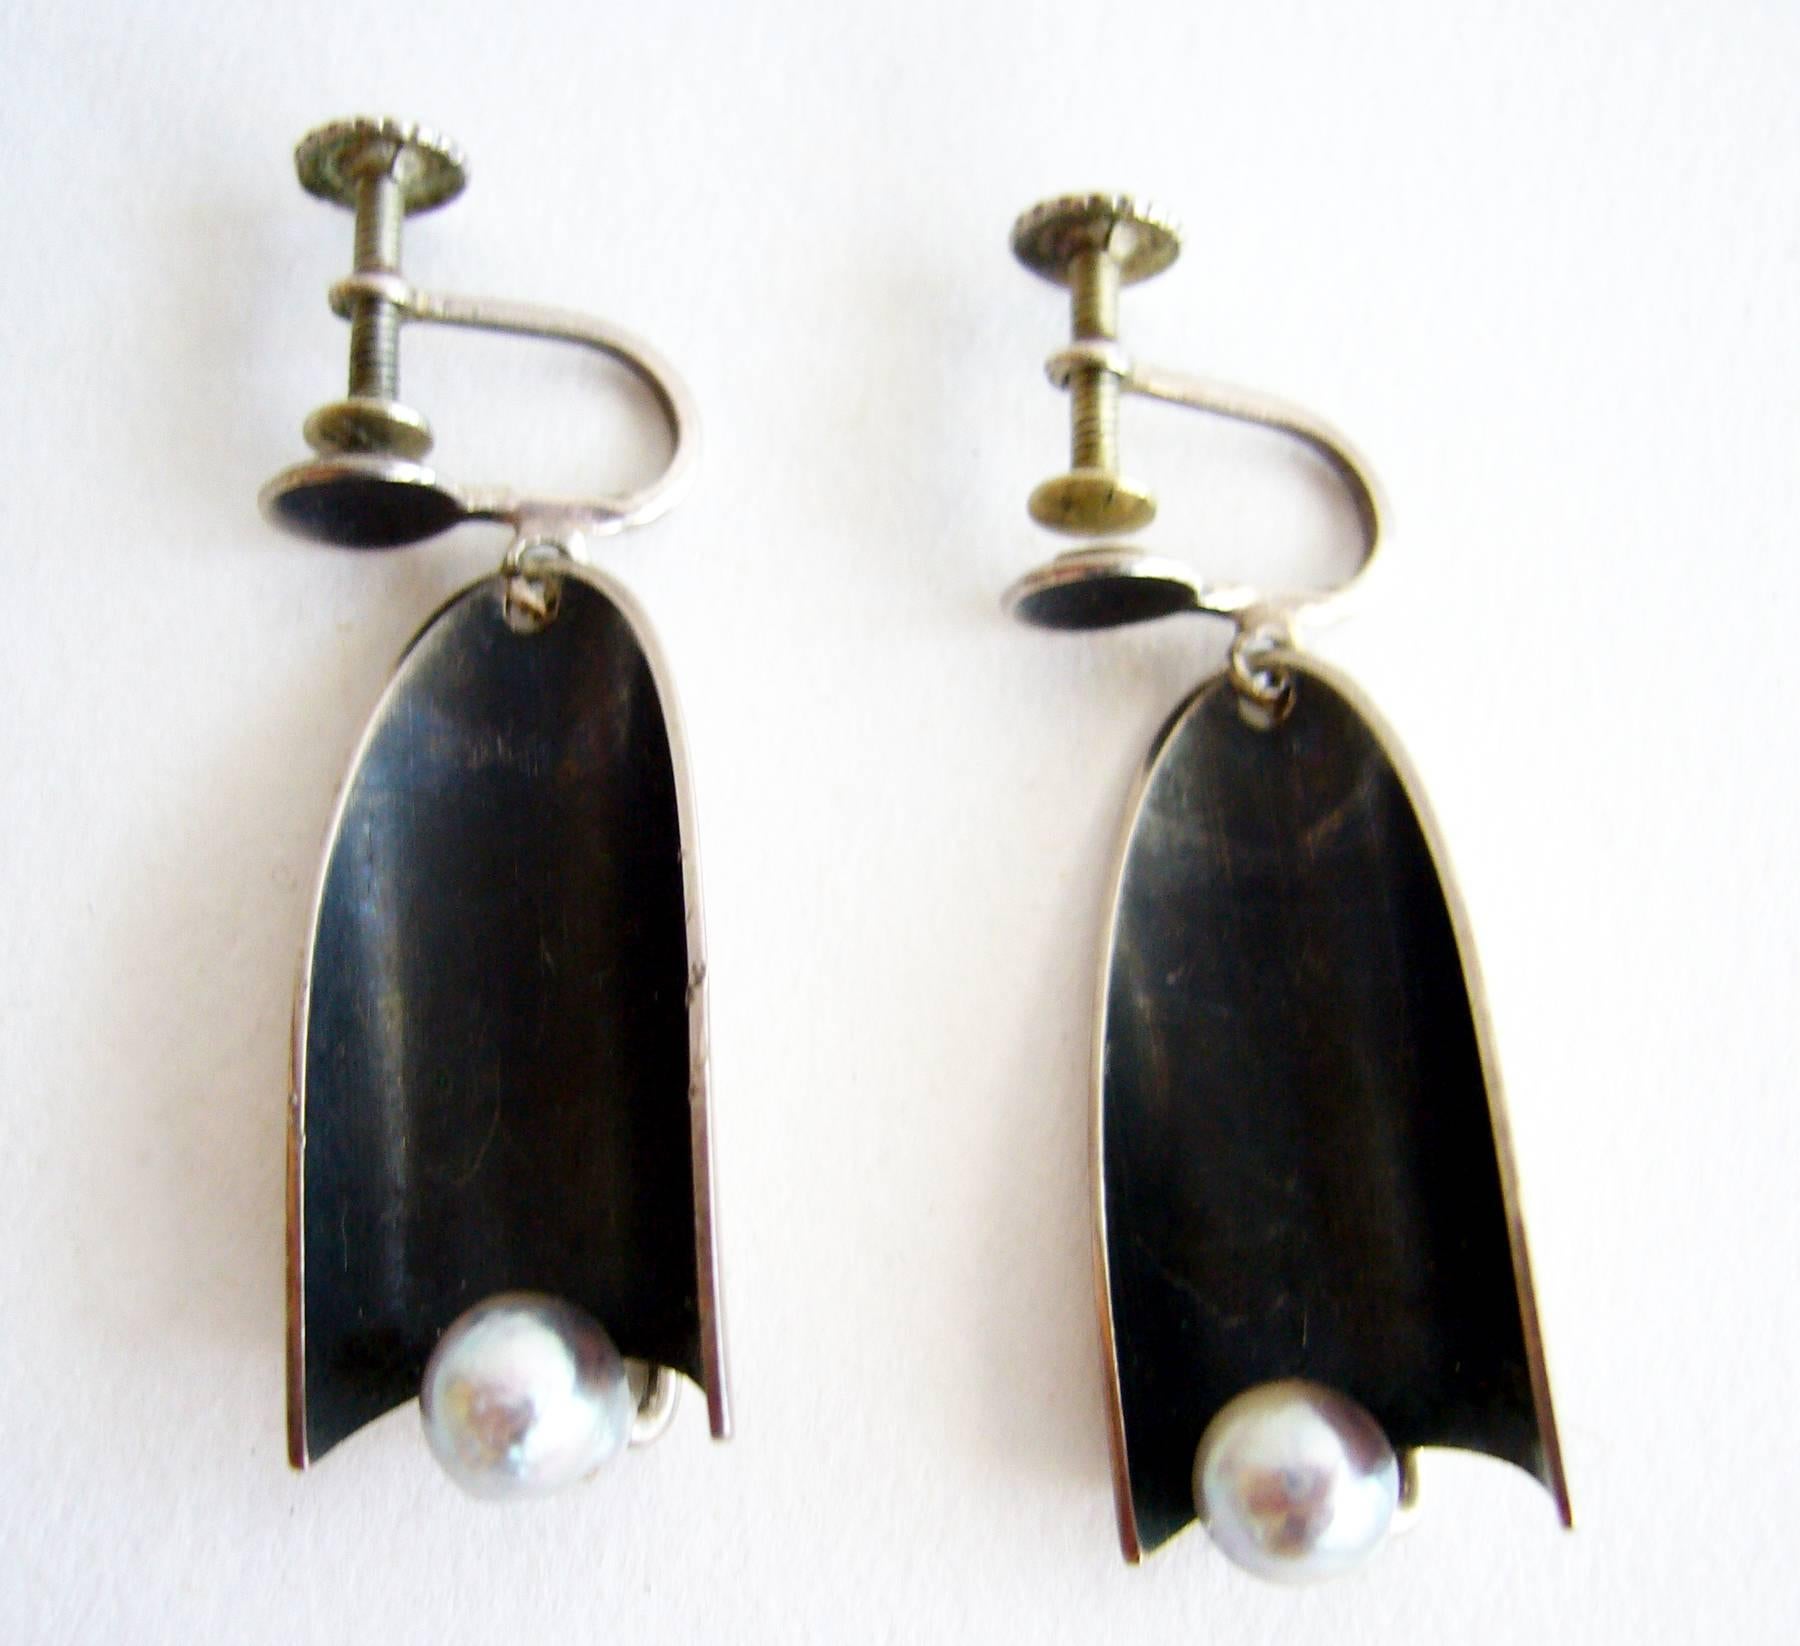 Kinetic sterling silver and grey pearl earrings created by modernist jeweler Jack Nutting of San Francisco, California.  Oxidized crescent shape swings within the setting for the pearl making a delicate sound in the ear when worn.  Screwback